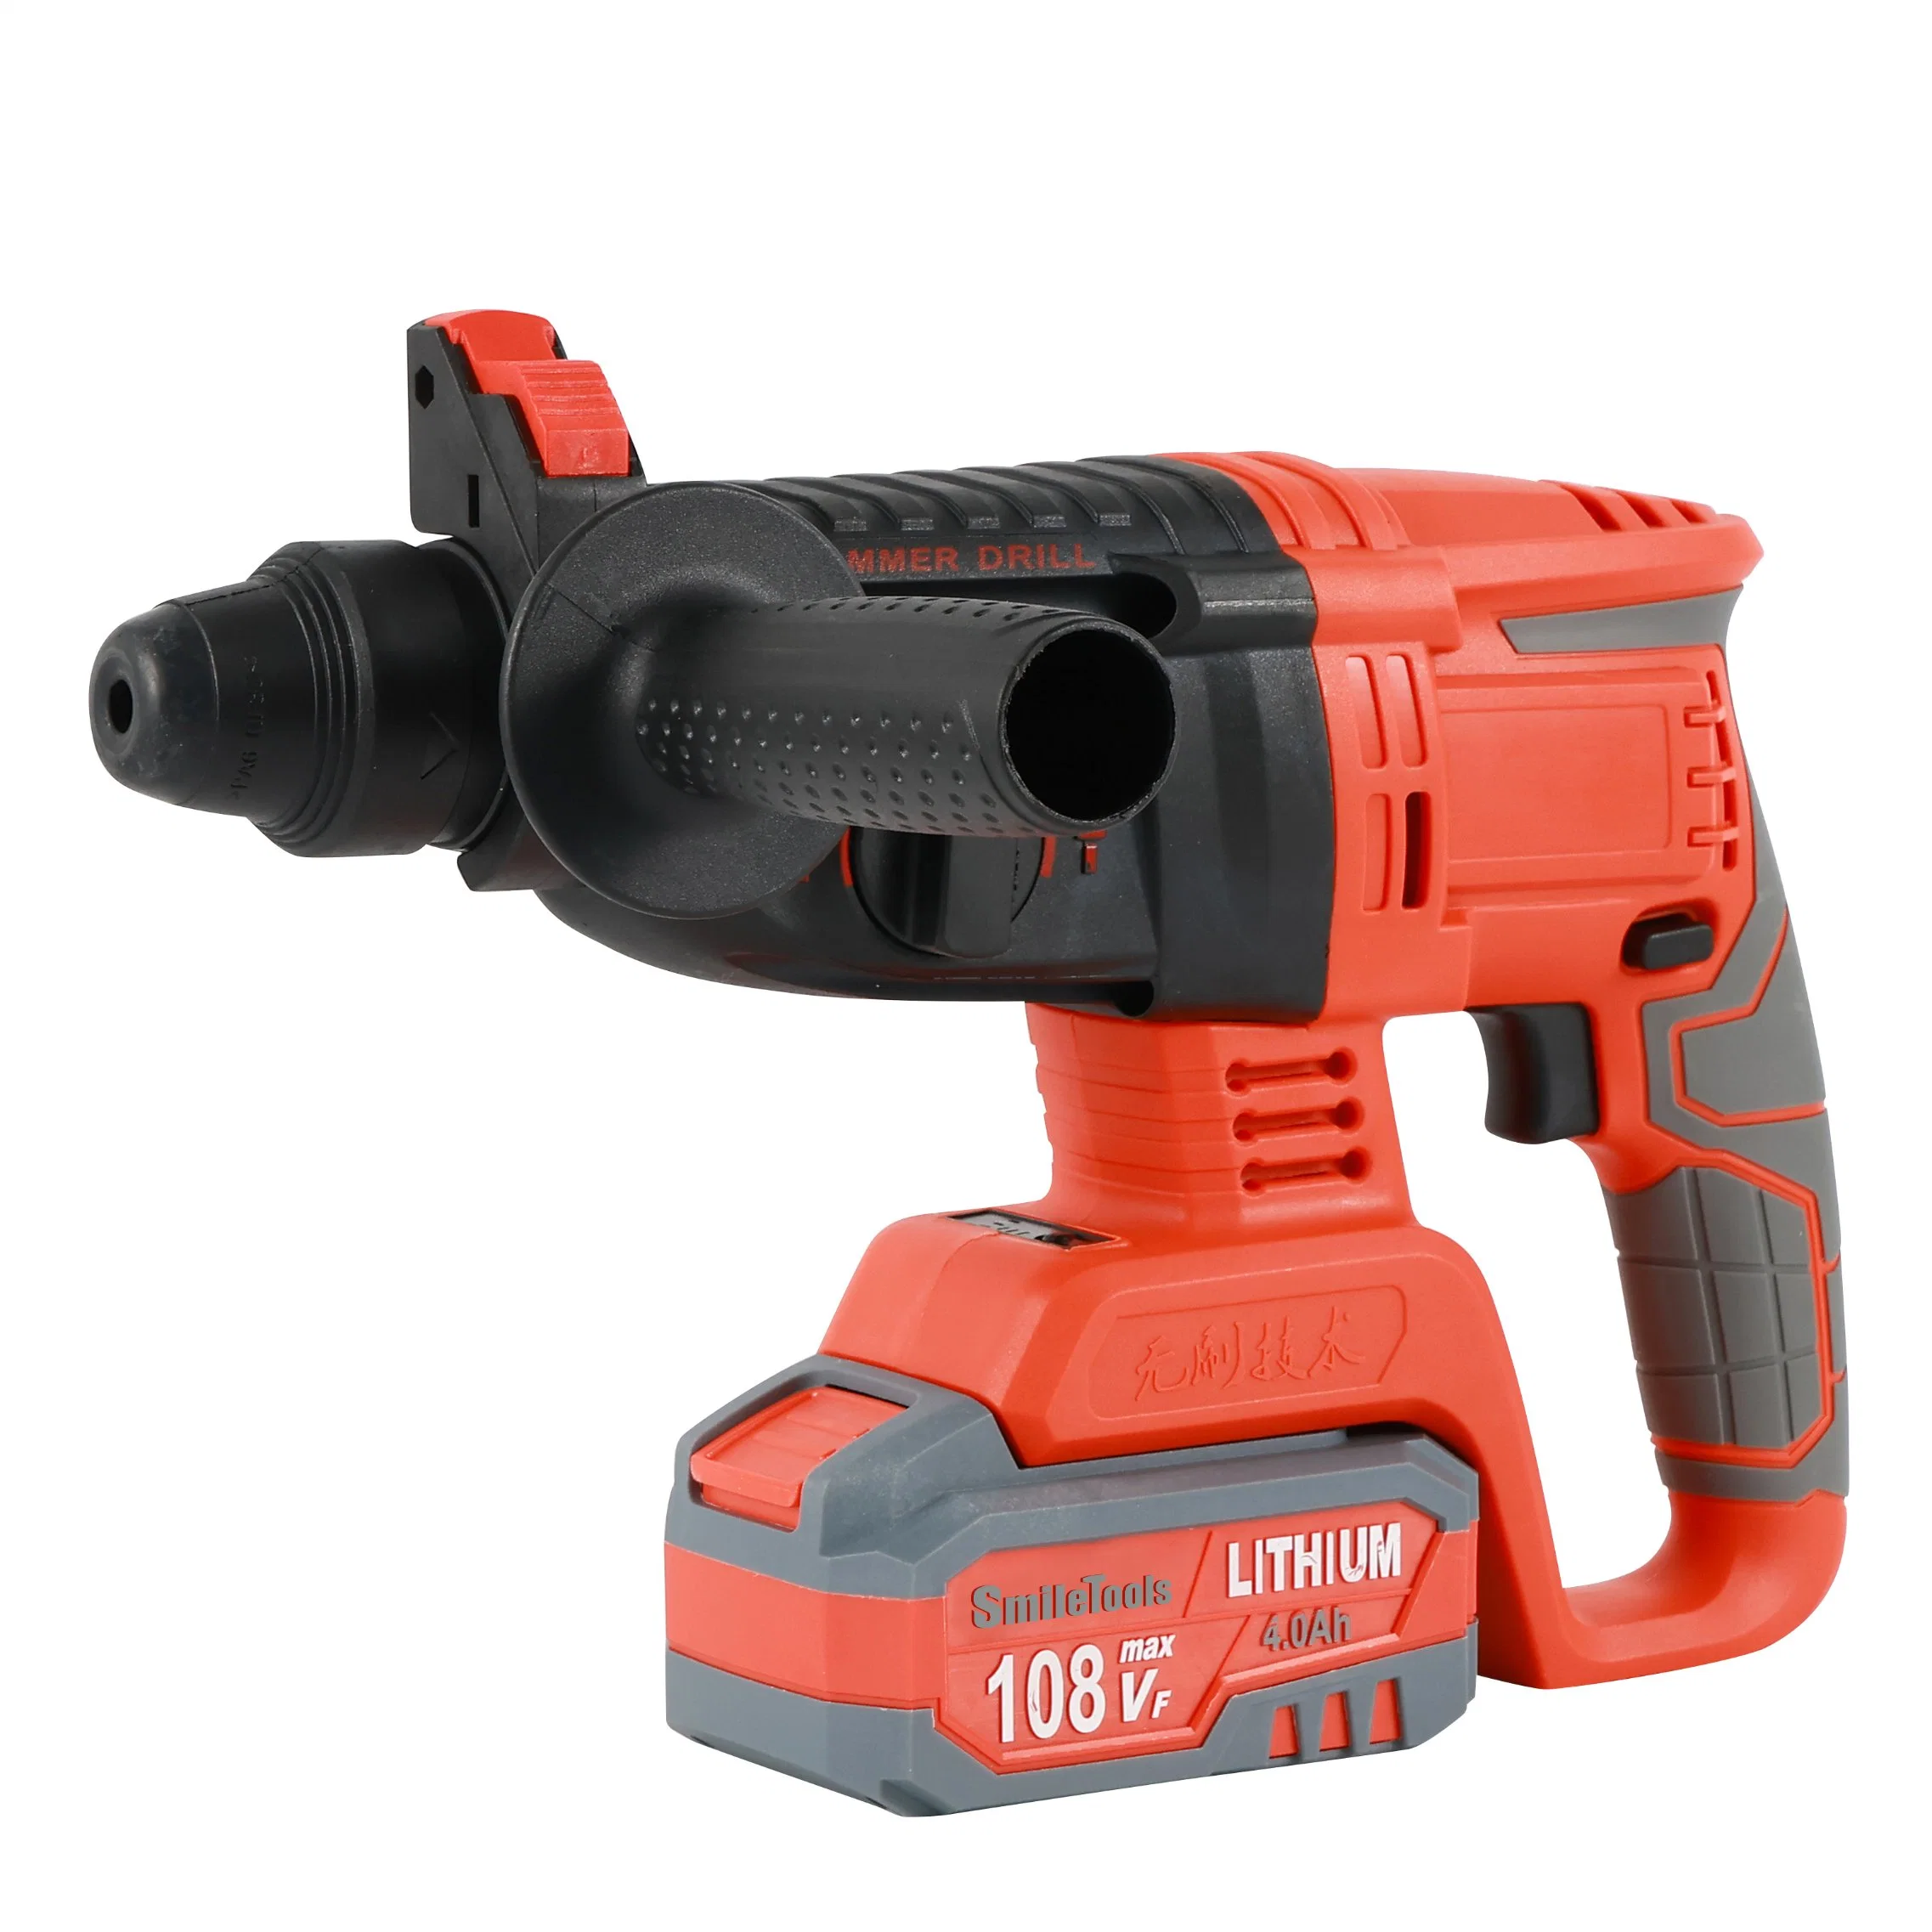 Hot Selling Model High Power SDS Max Rotary Hammer Electric Drill Rotary Hammer with BMC Hammer Battery Drill